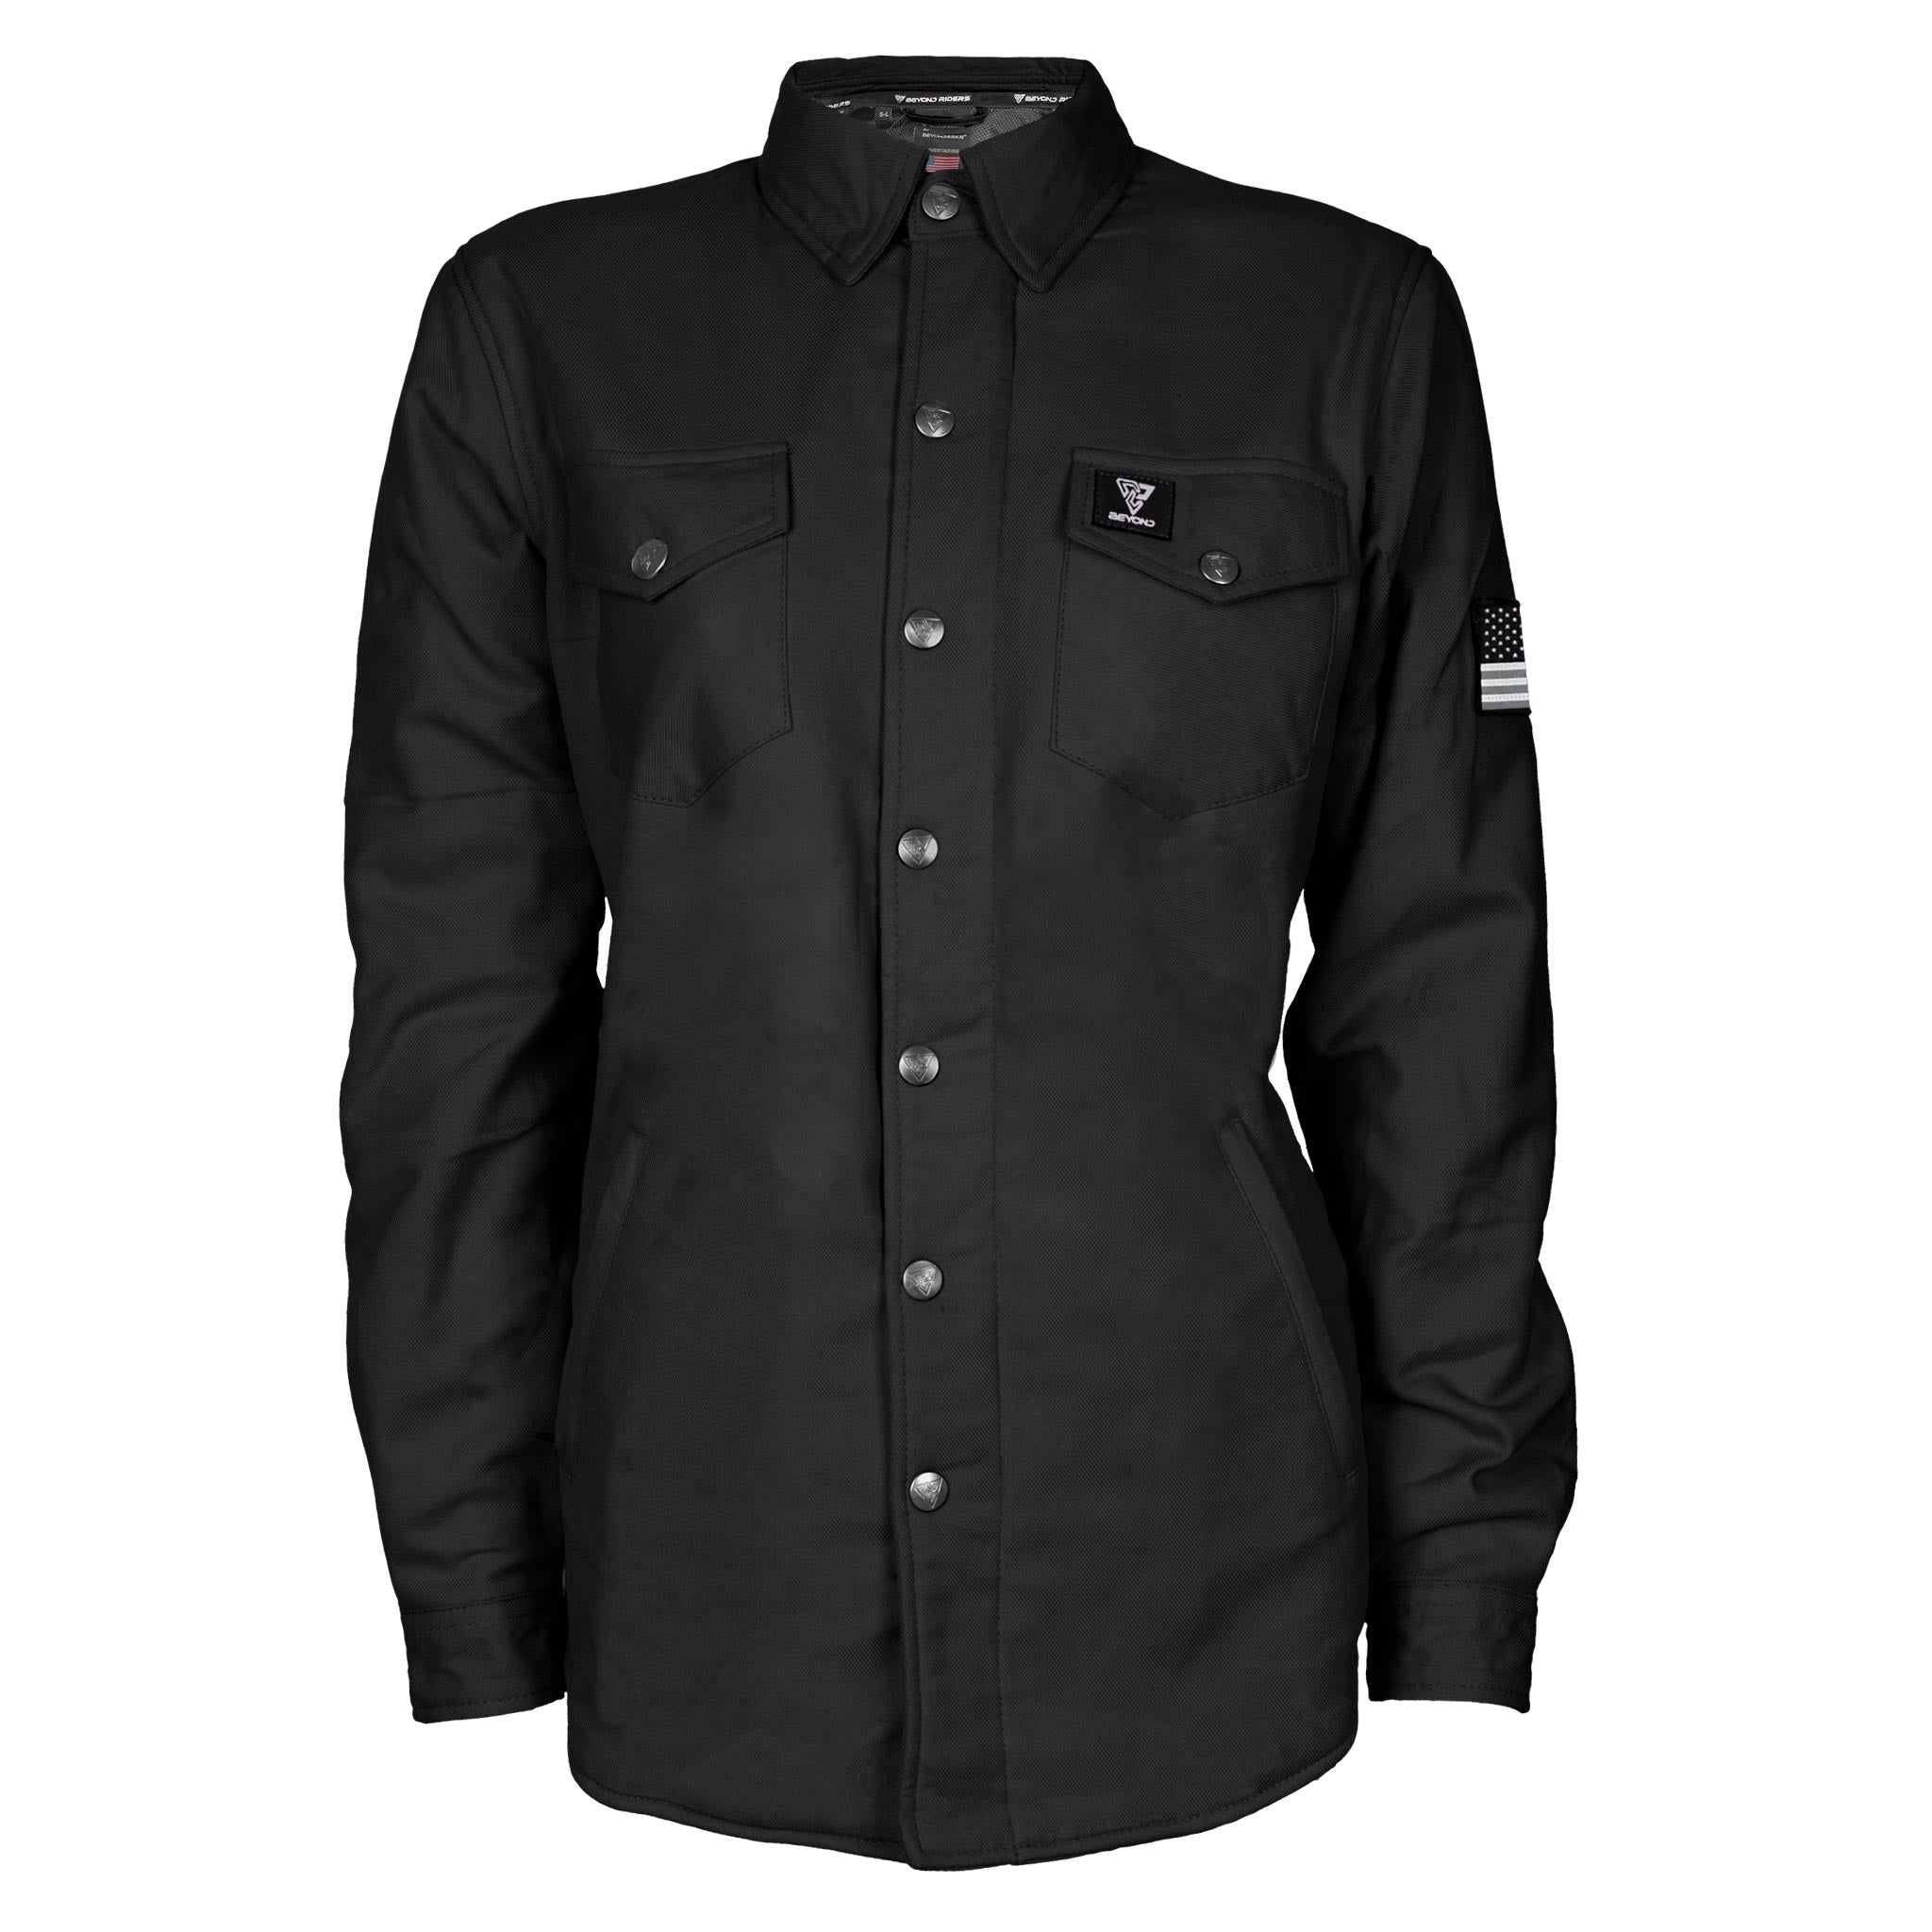 Protective Flannel Shirt for Women - Black Solid